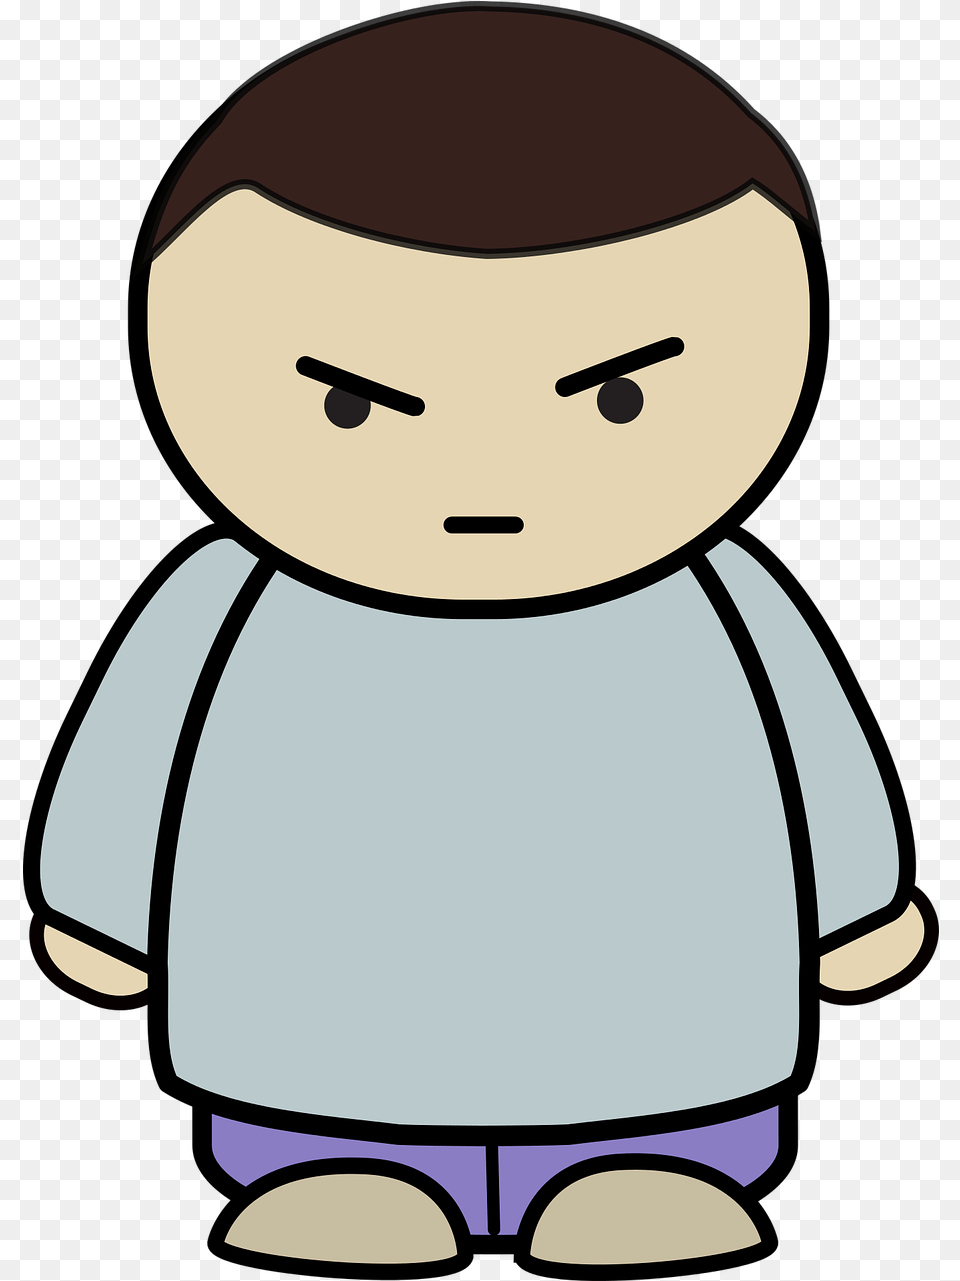 Angry Boy Teenager Free Vector Graphic On Pixabay Angry Character, Baby, Person, Toy, Face Png